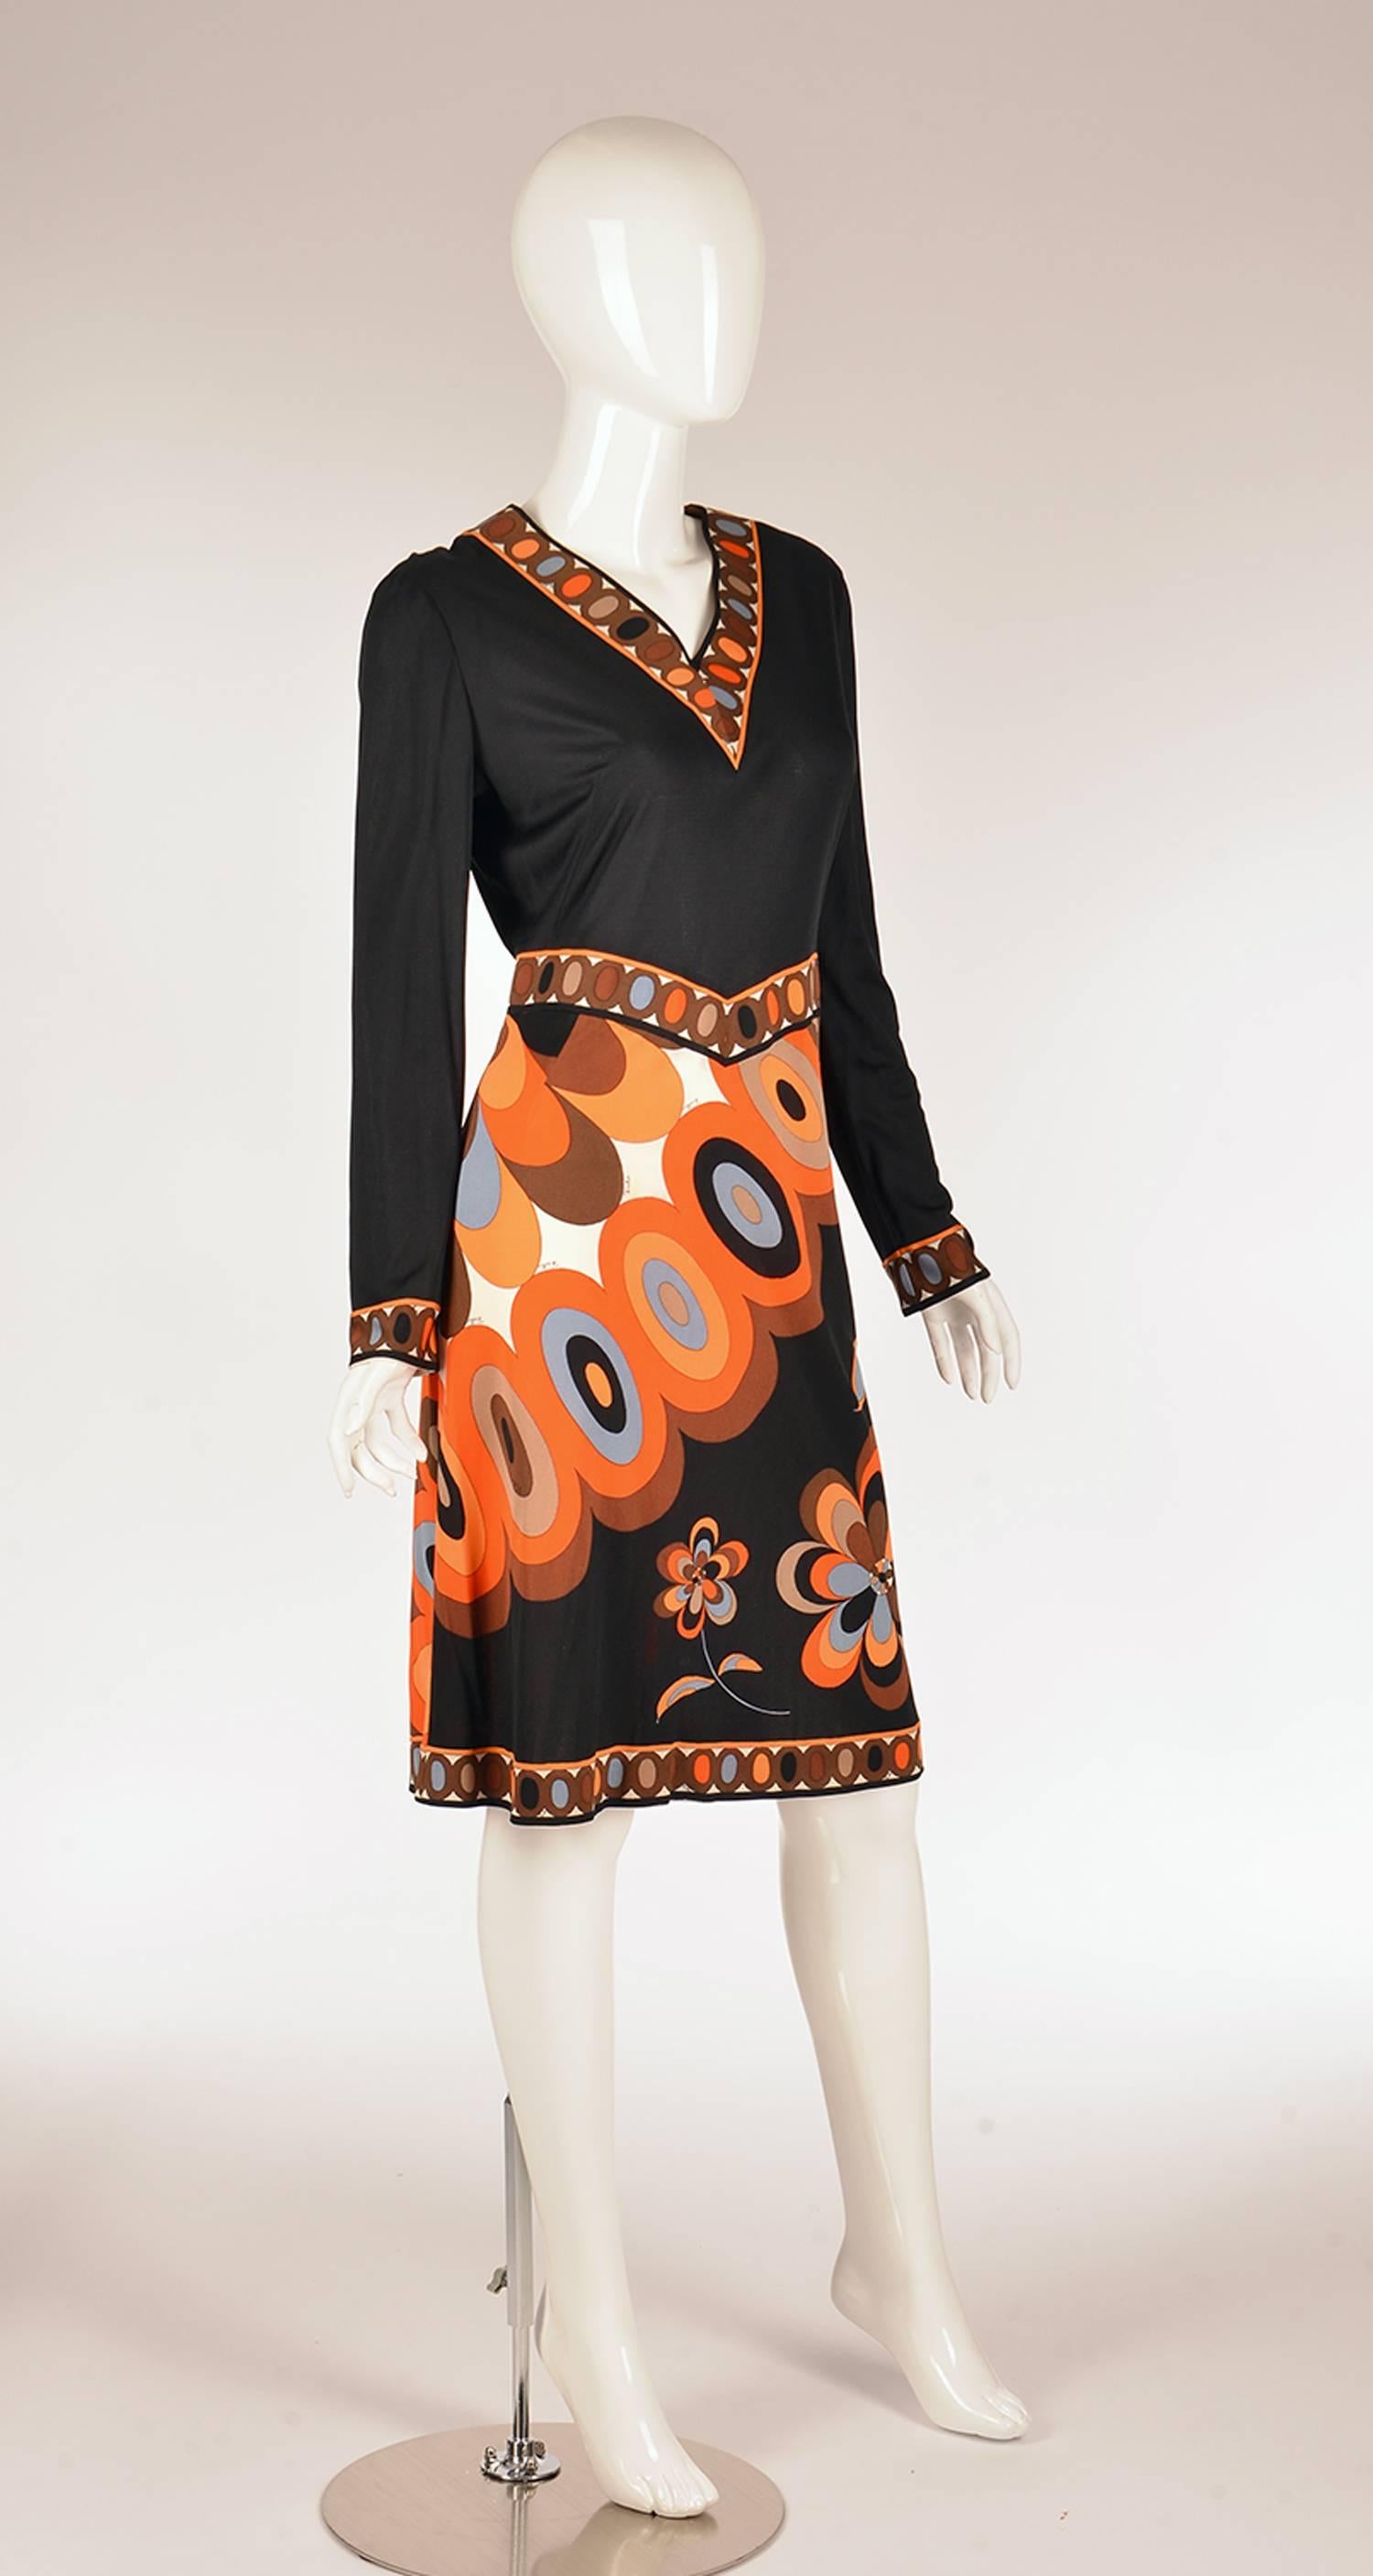 1960s Emilio Pucci silk dress. This dress features gorgeous fall colors - pale blue, walnut, chocolate, fire orange, cream, and red- arranged effortlessly in an oval floral design. The print on this dress is intrinsically Pucci, as the abstract